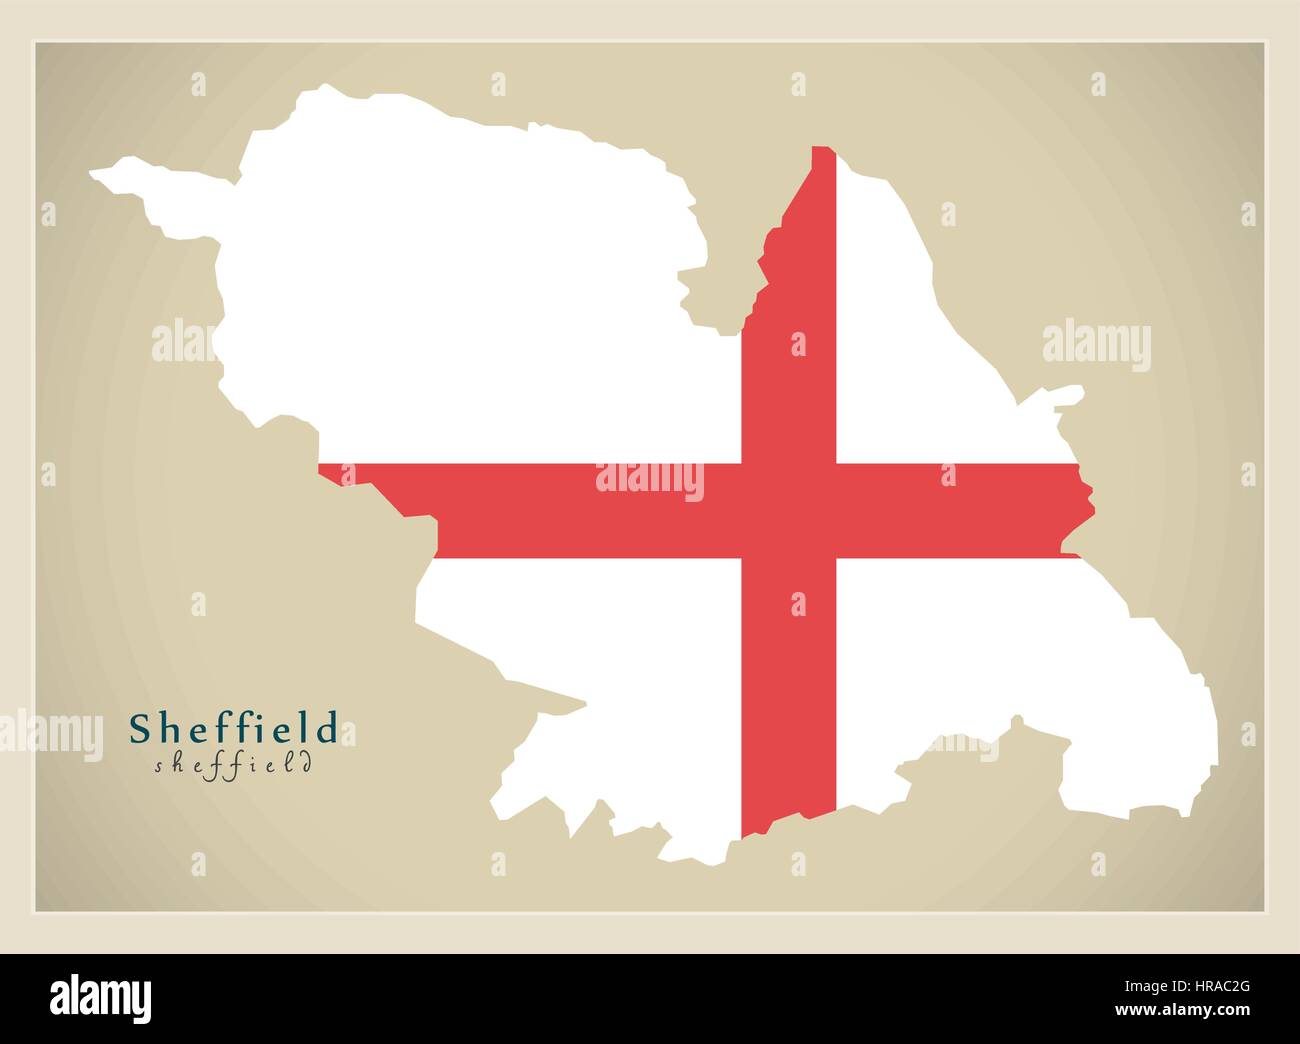 Modern City Map - Sheffield with flag of England illustration Stock Vector